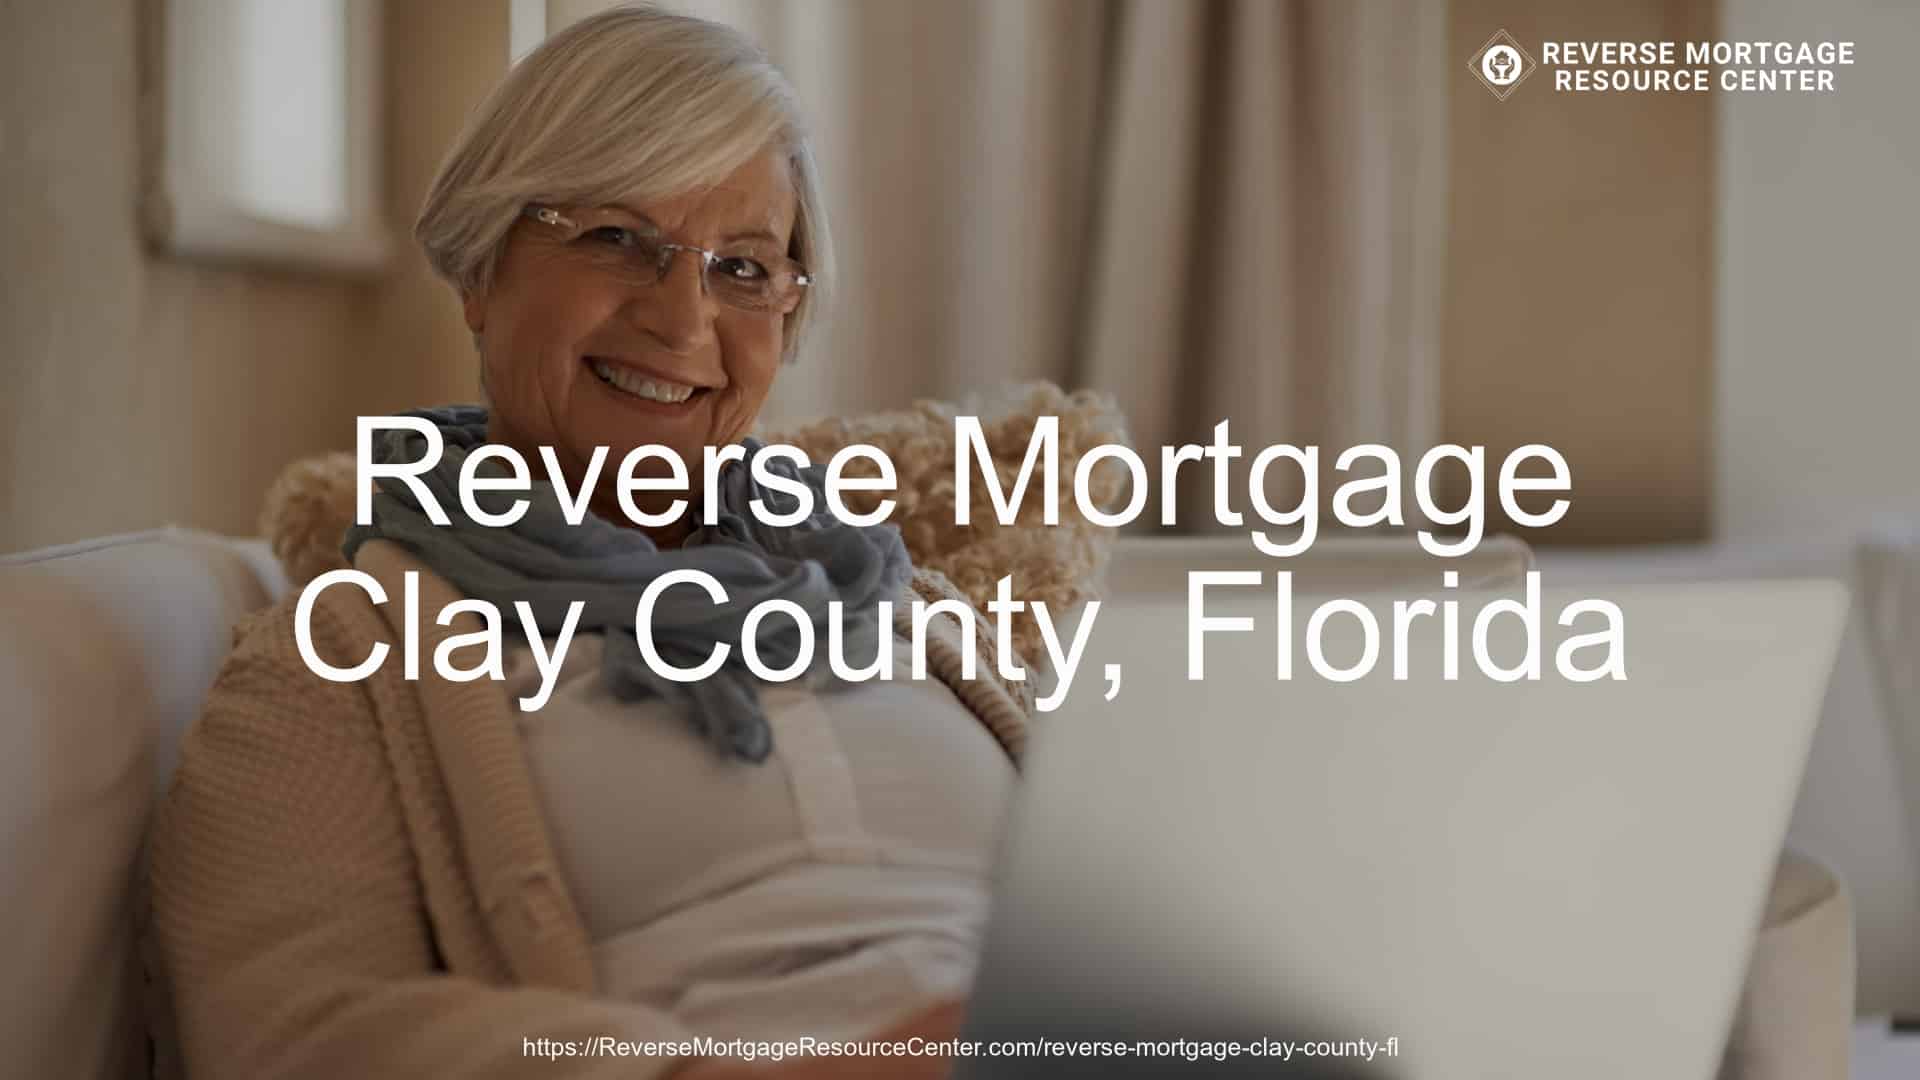 Reverse Mortgage Loans in Clay County Florida